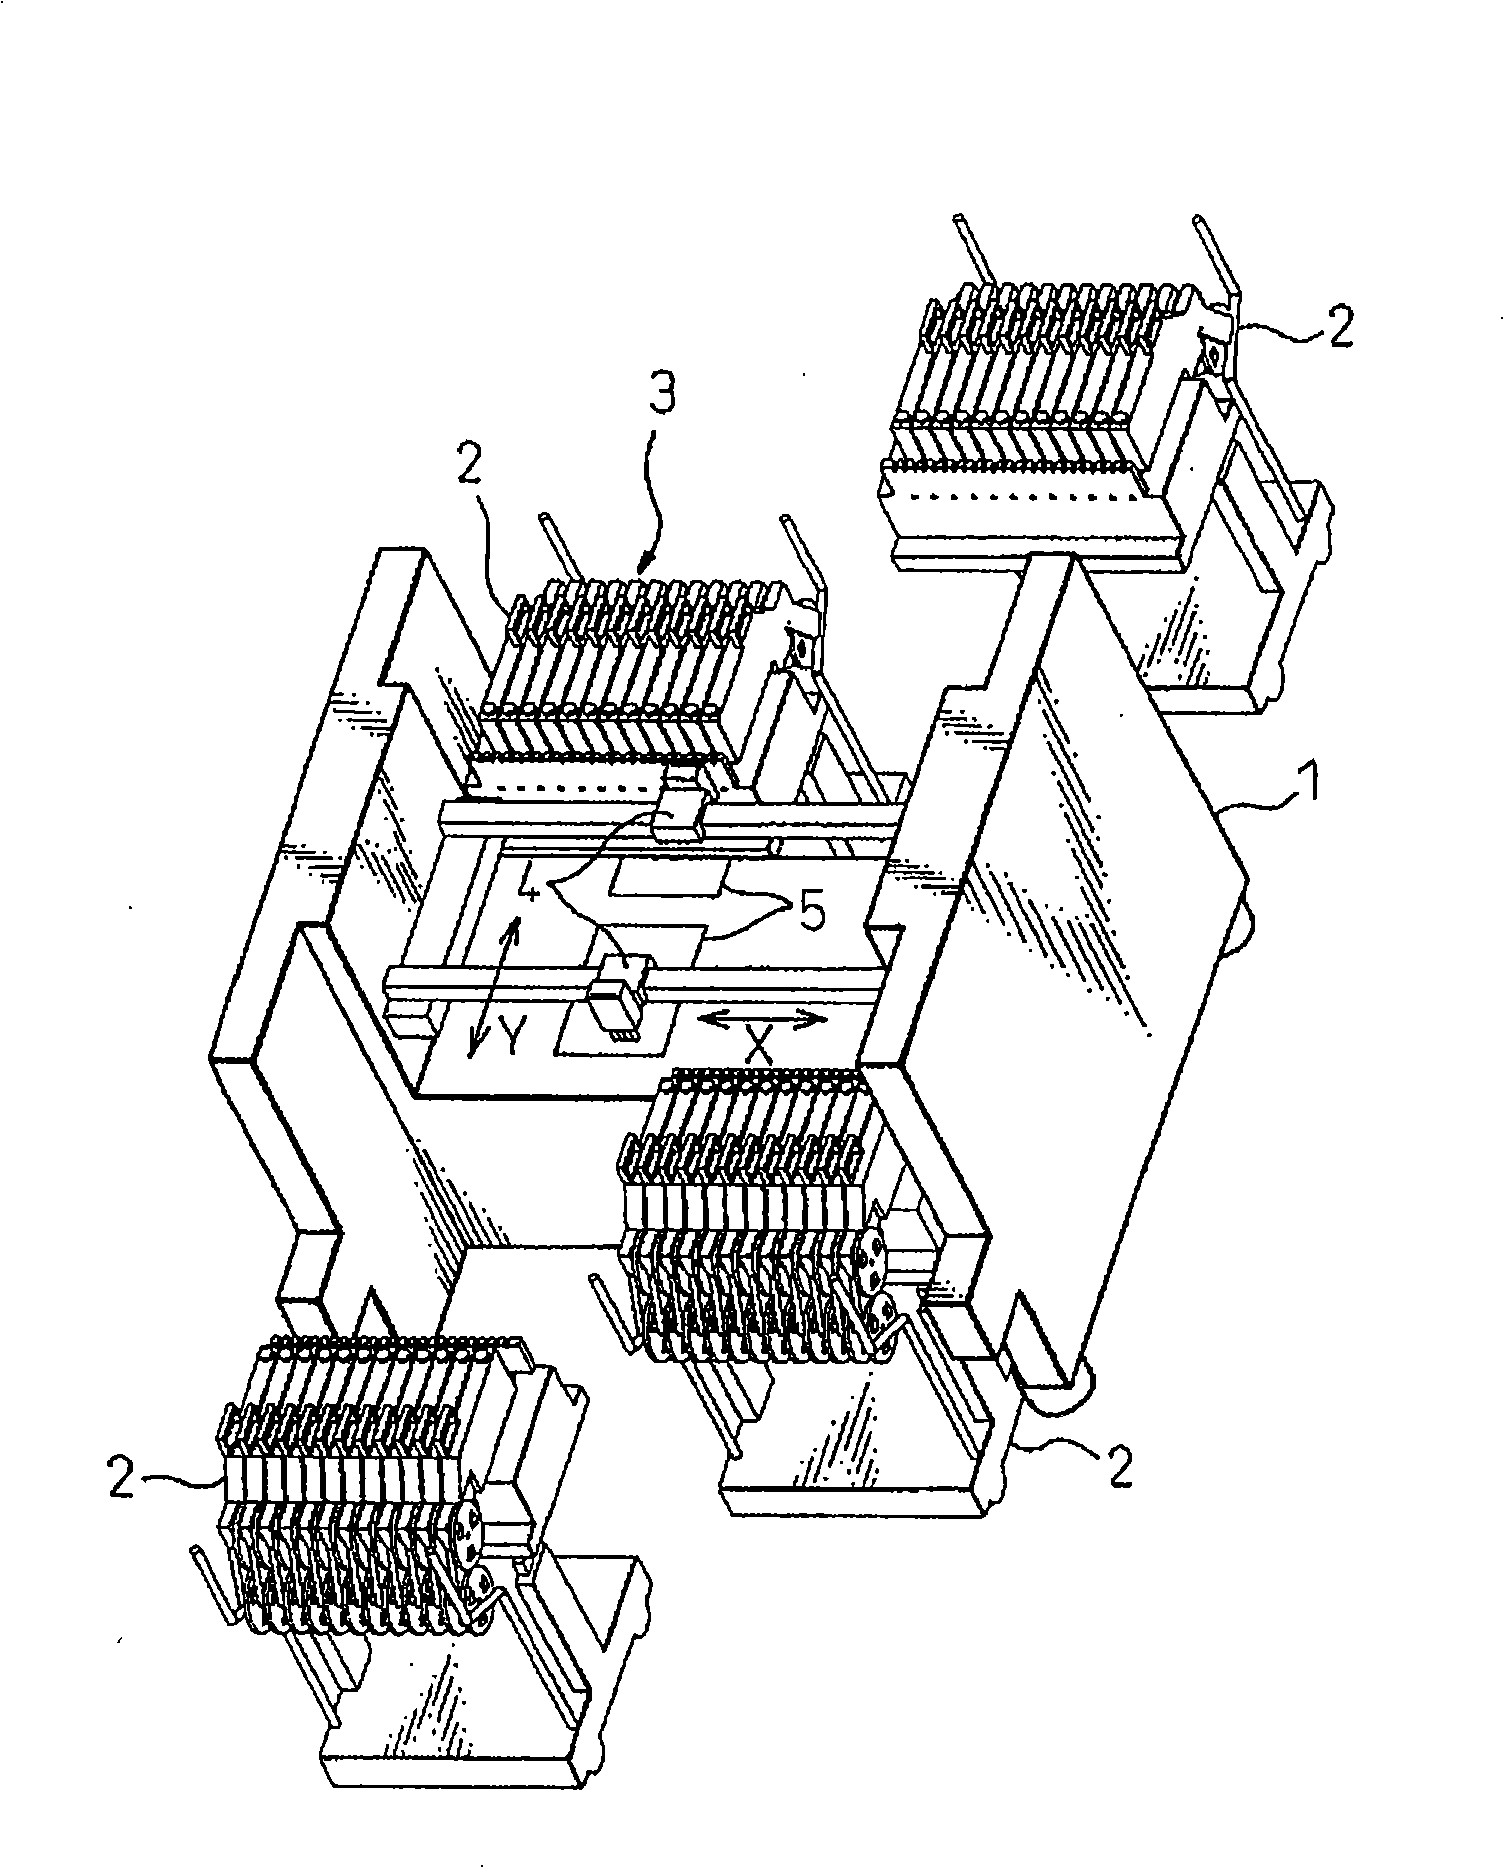 Operation support system of element assembling device, recognition method of element order and recognition method of Cassette holder order